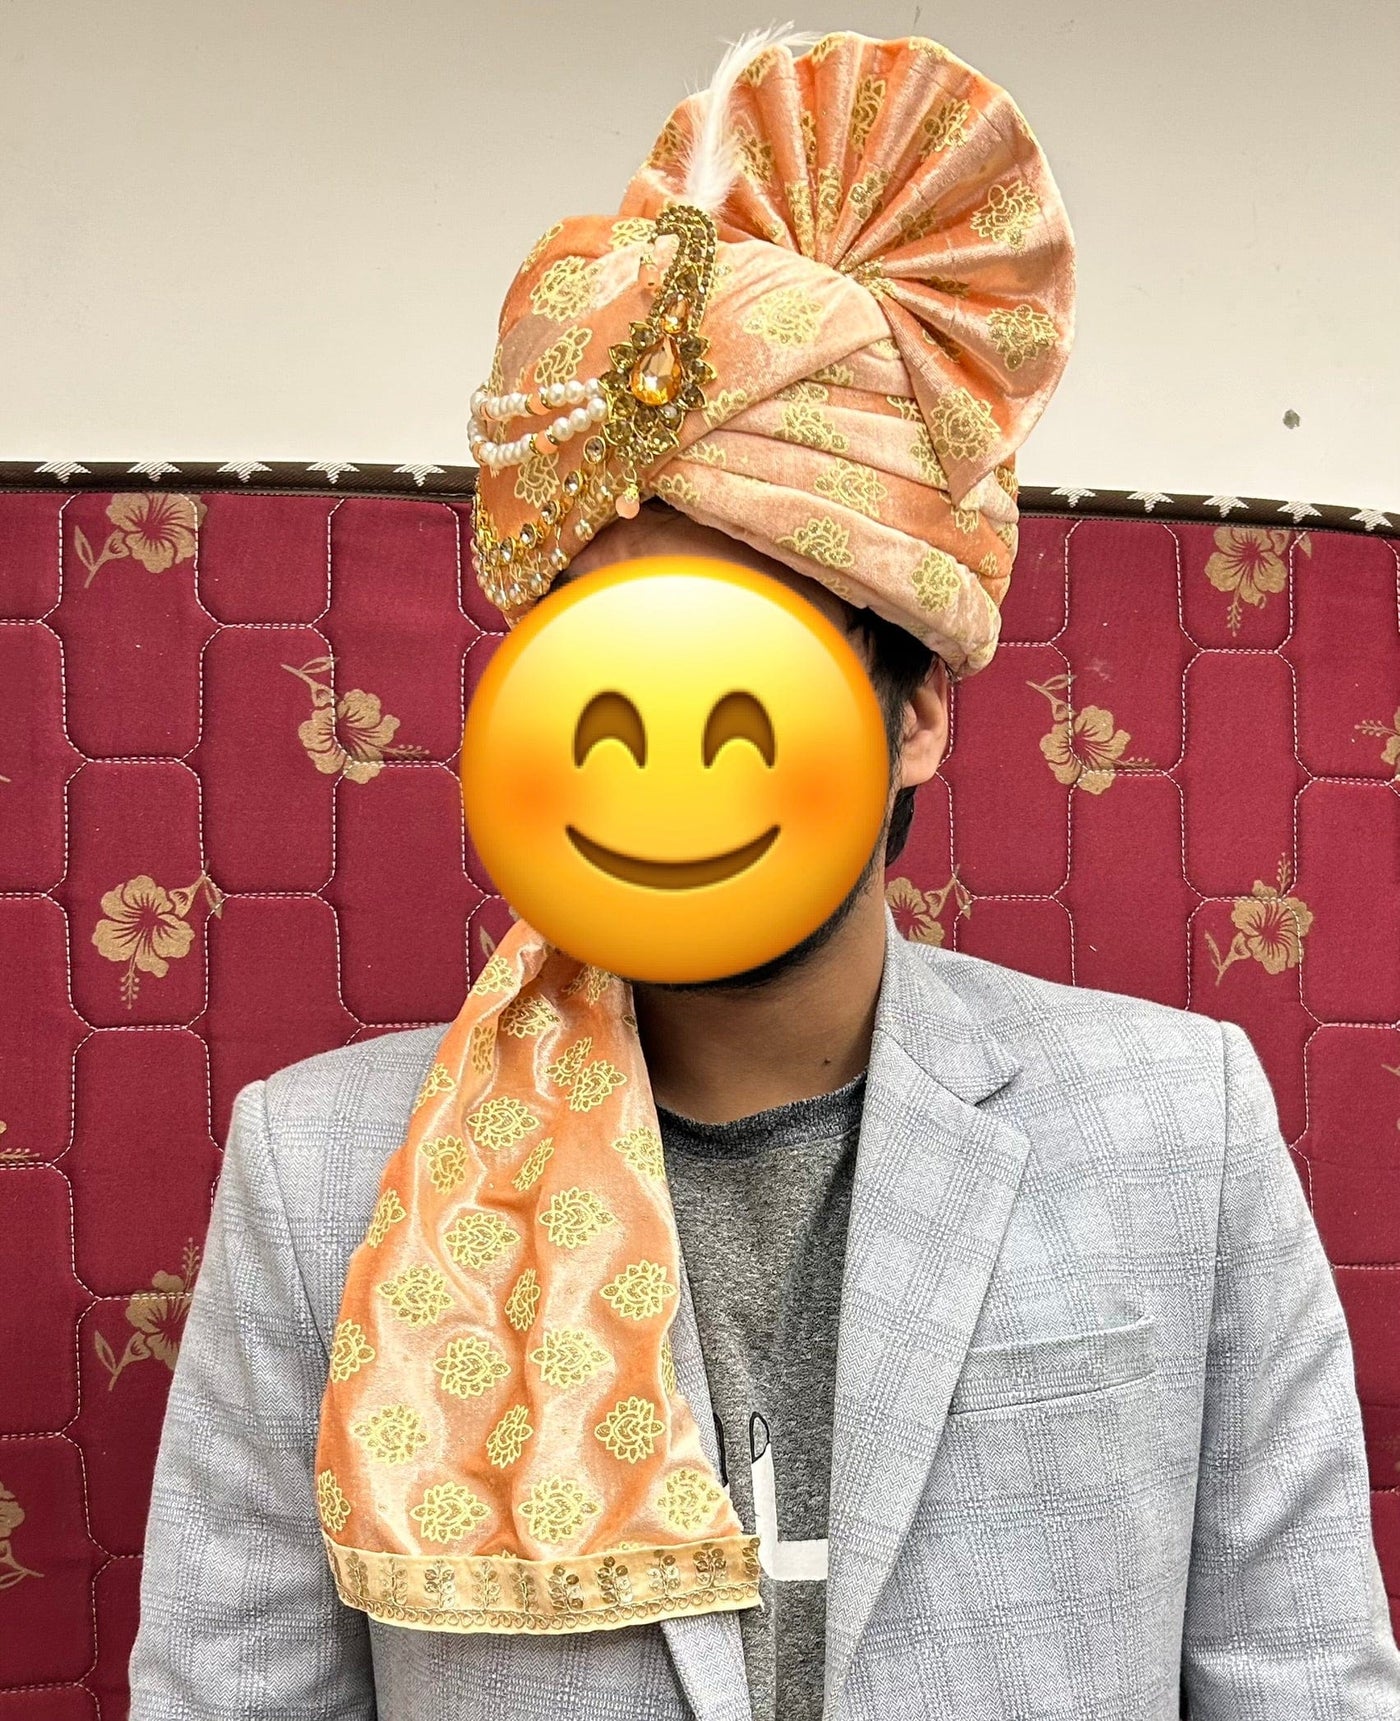 520 Rs on buying 30 pcs / WhatsApp at 8619550223 to order 🏷️ safa pagdi LAMANSH® Designer Readymade Pagdi's for Special Guests / Barati Swagat welcome turbans for Indian weddings